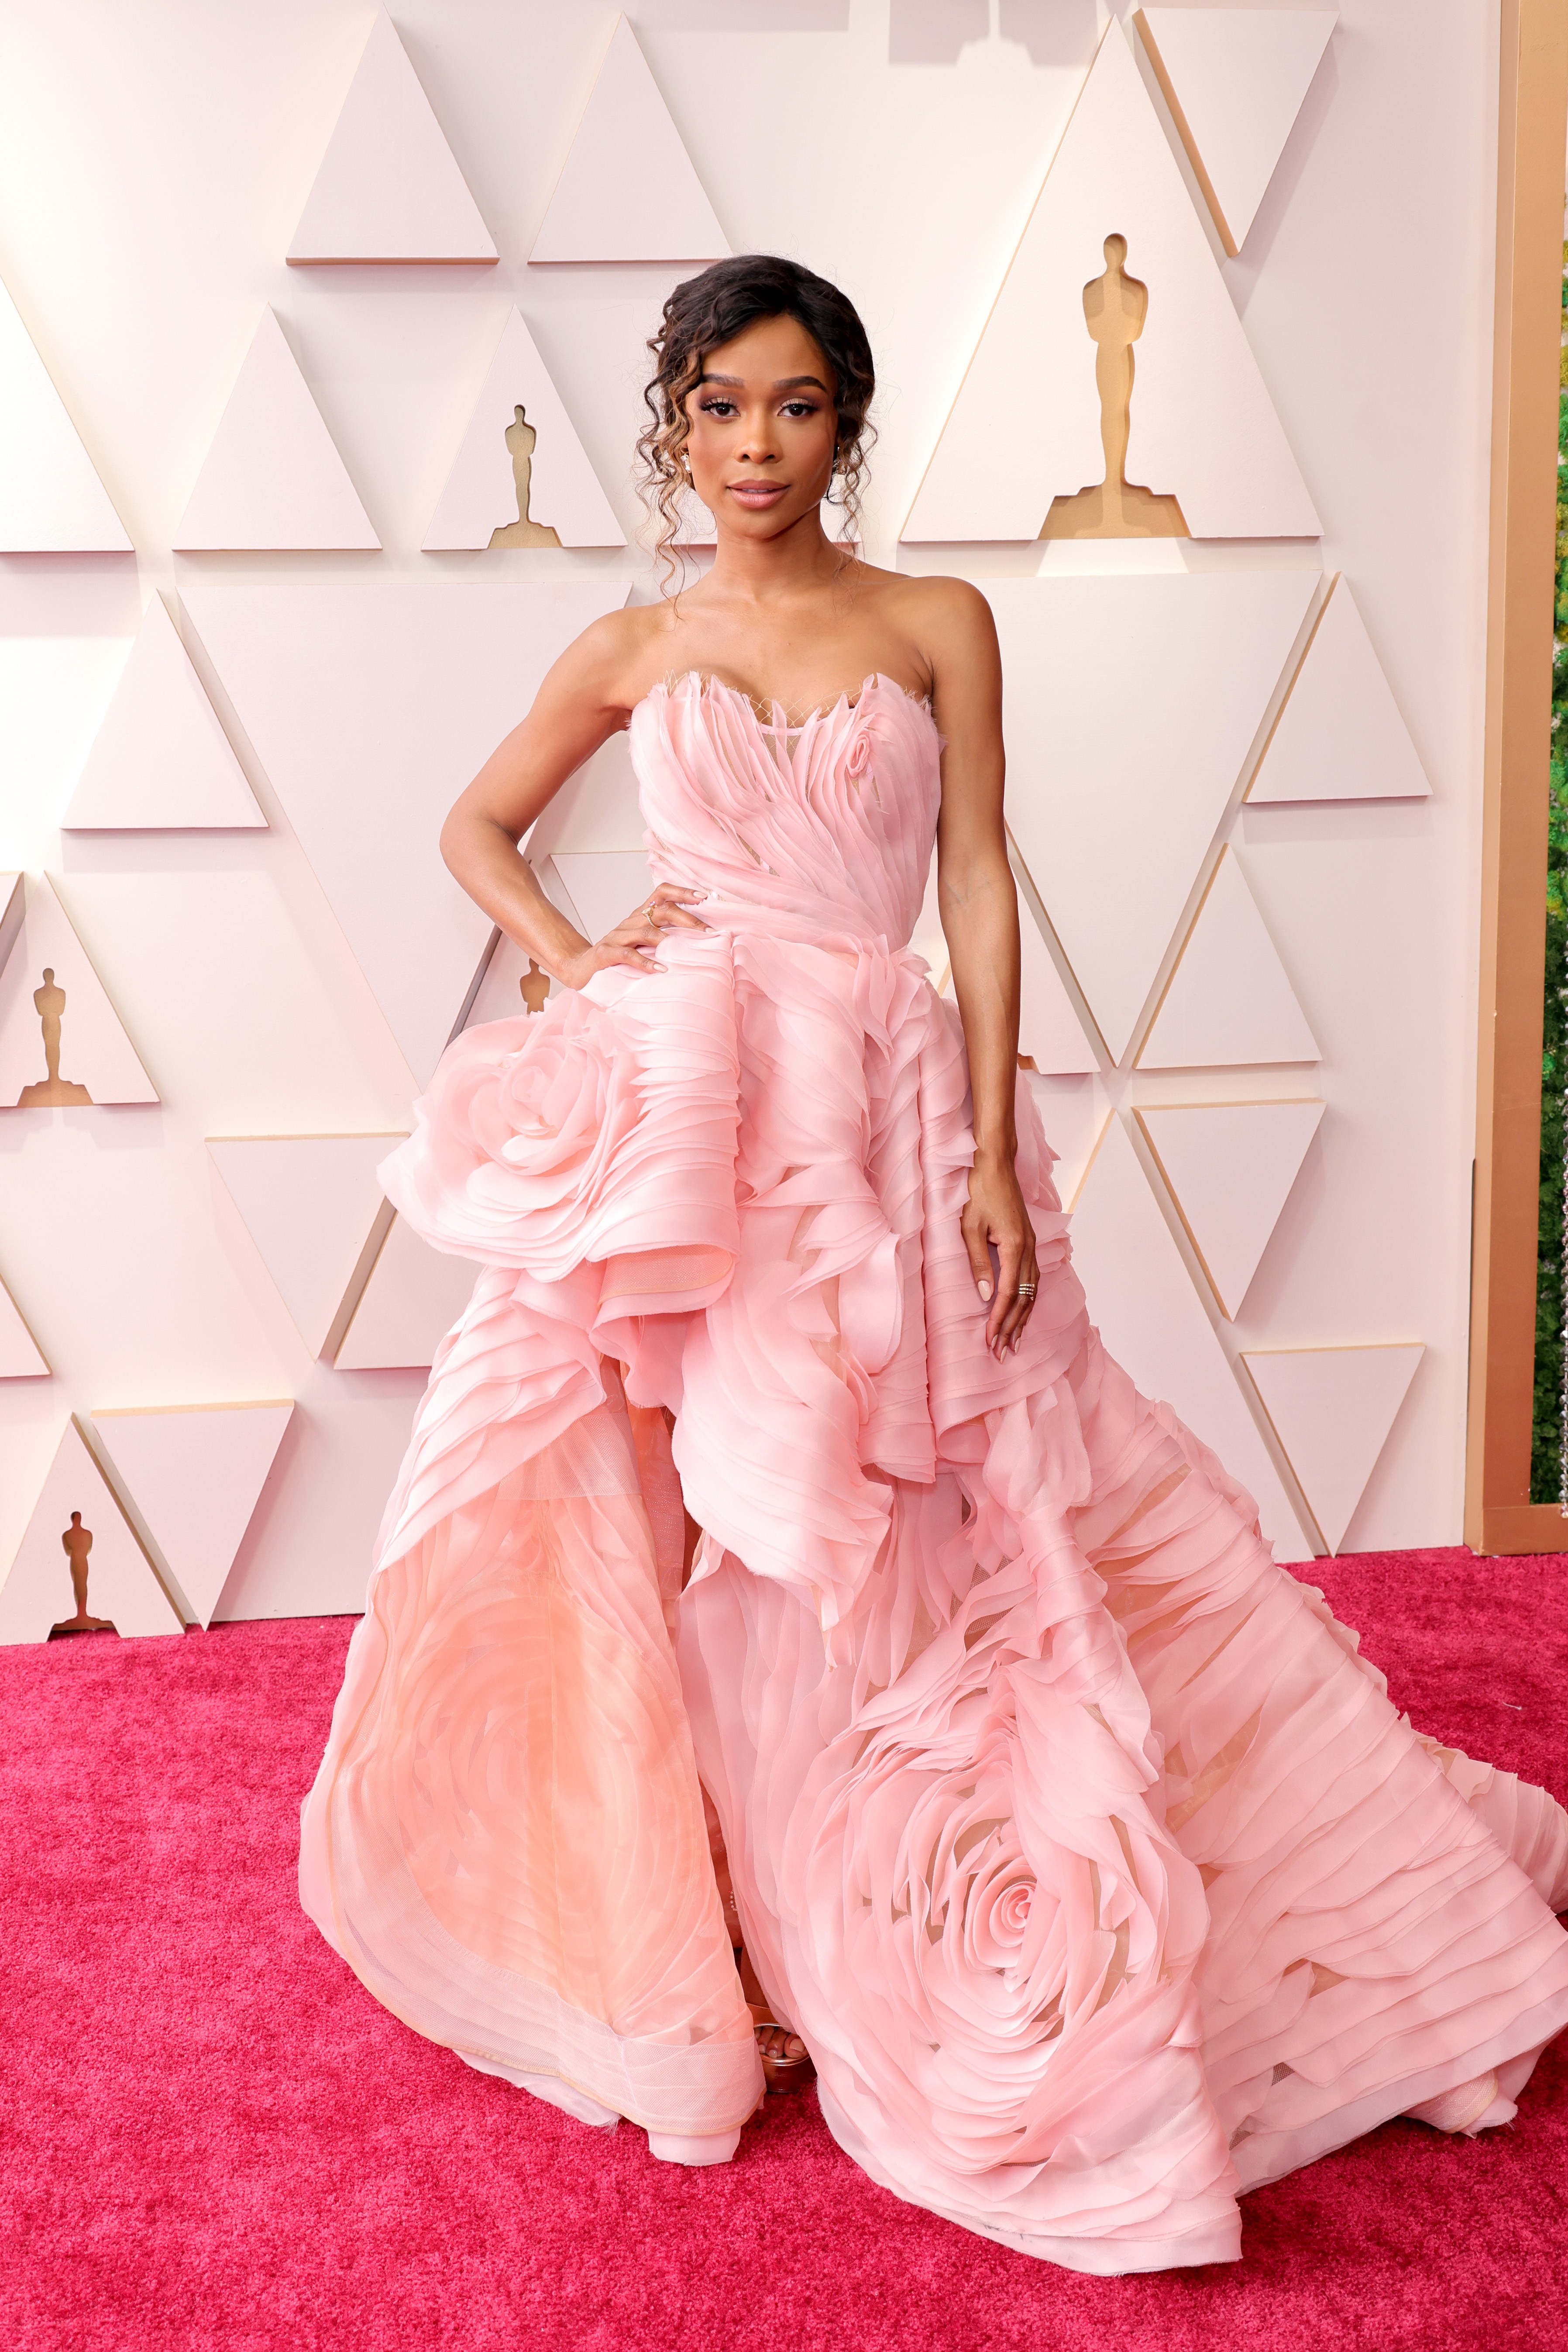 HOLLYWOOD, CALIFORNIA - MARCH 27: Zuri Hall attends the 94th Annual Academy Awards at Hollywood and Highland on March 27, 2022 in Hollywood, California. (Photo by Momodu Mansaray/Getty Images) (Foto: Getty Images)